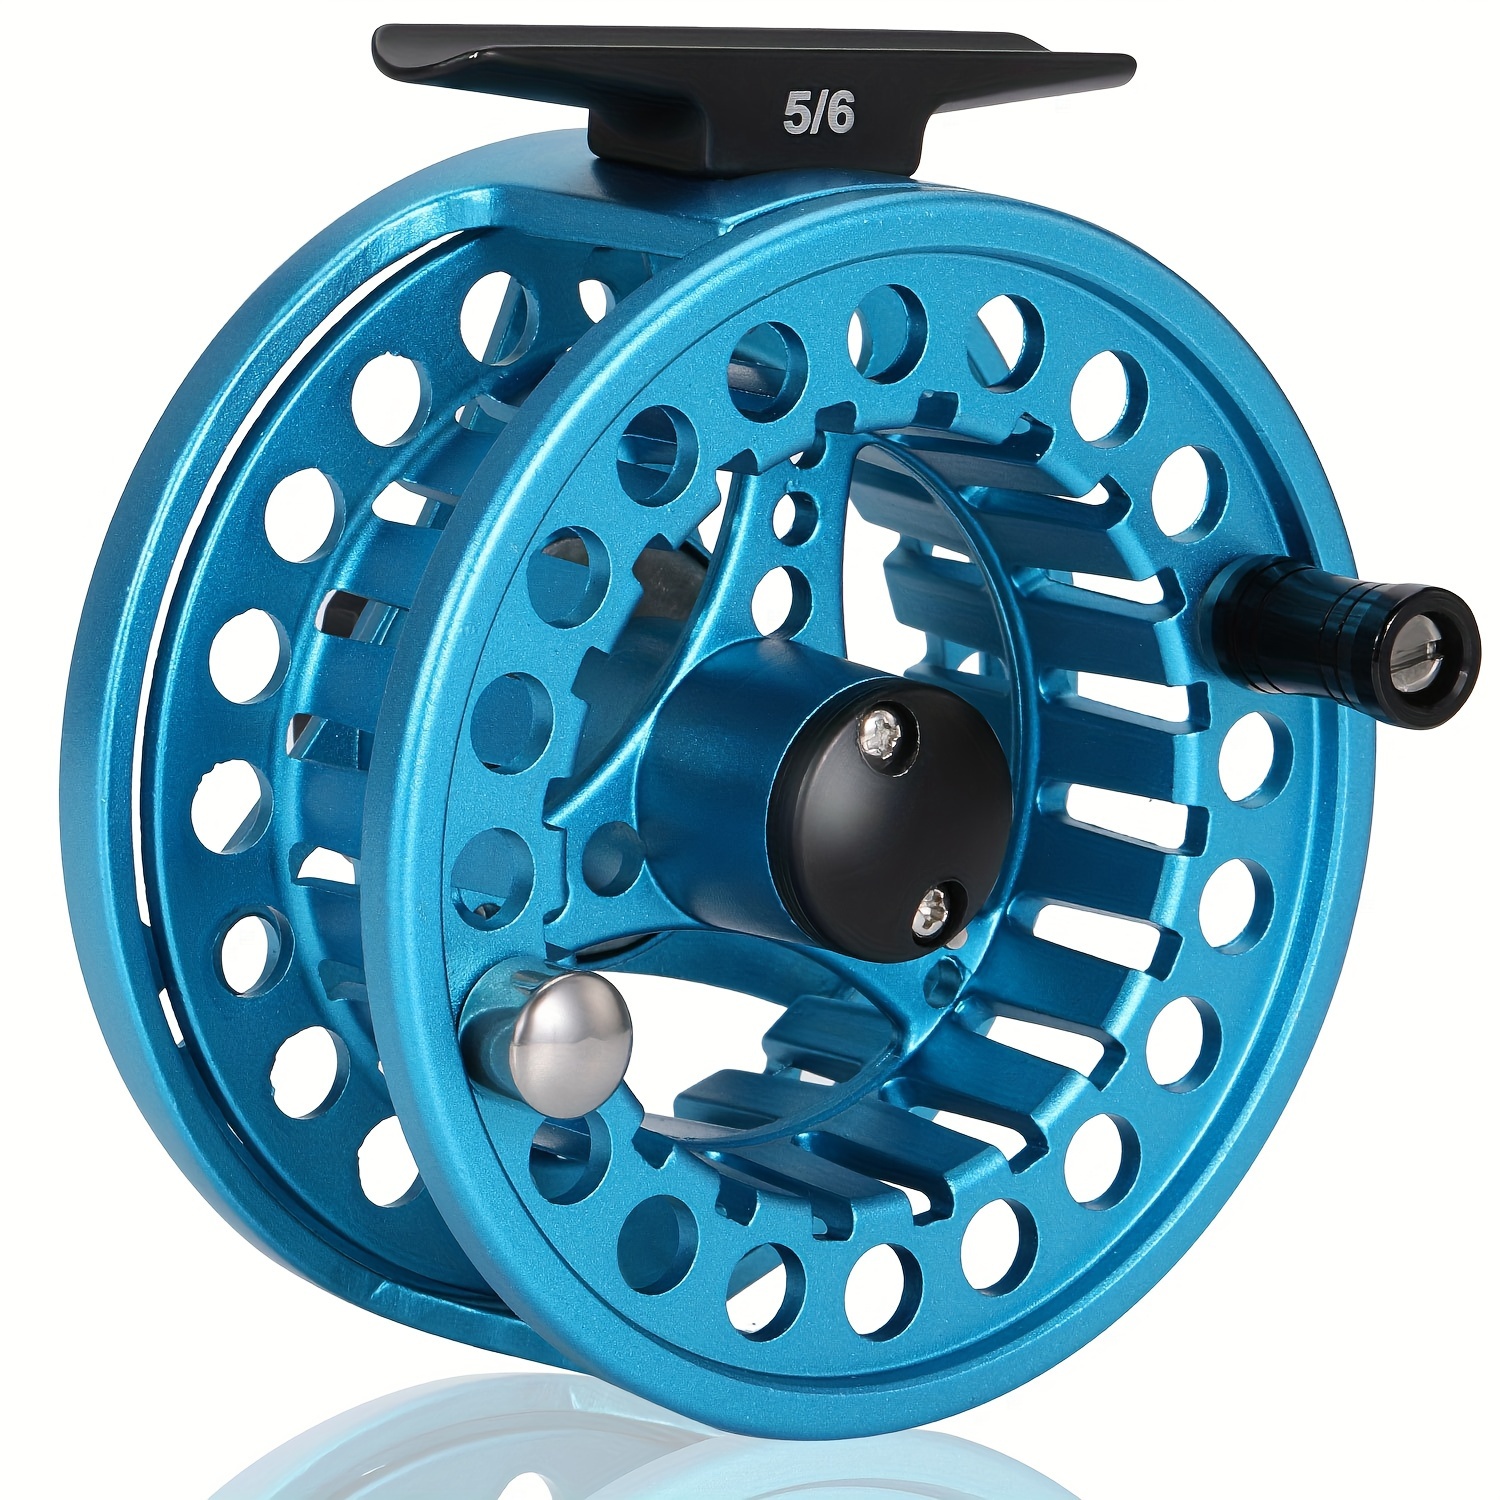 Sougayilang 5/6 7/8 Fly Fishing Reel high Speed Ratio Fishing Reel  CNC-Machined Aluminum Alloy Body and Spool Fly Reels - AliExpress